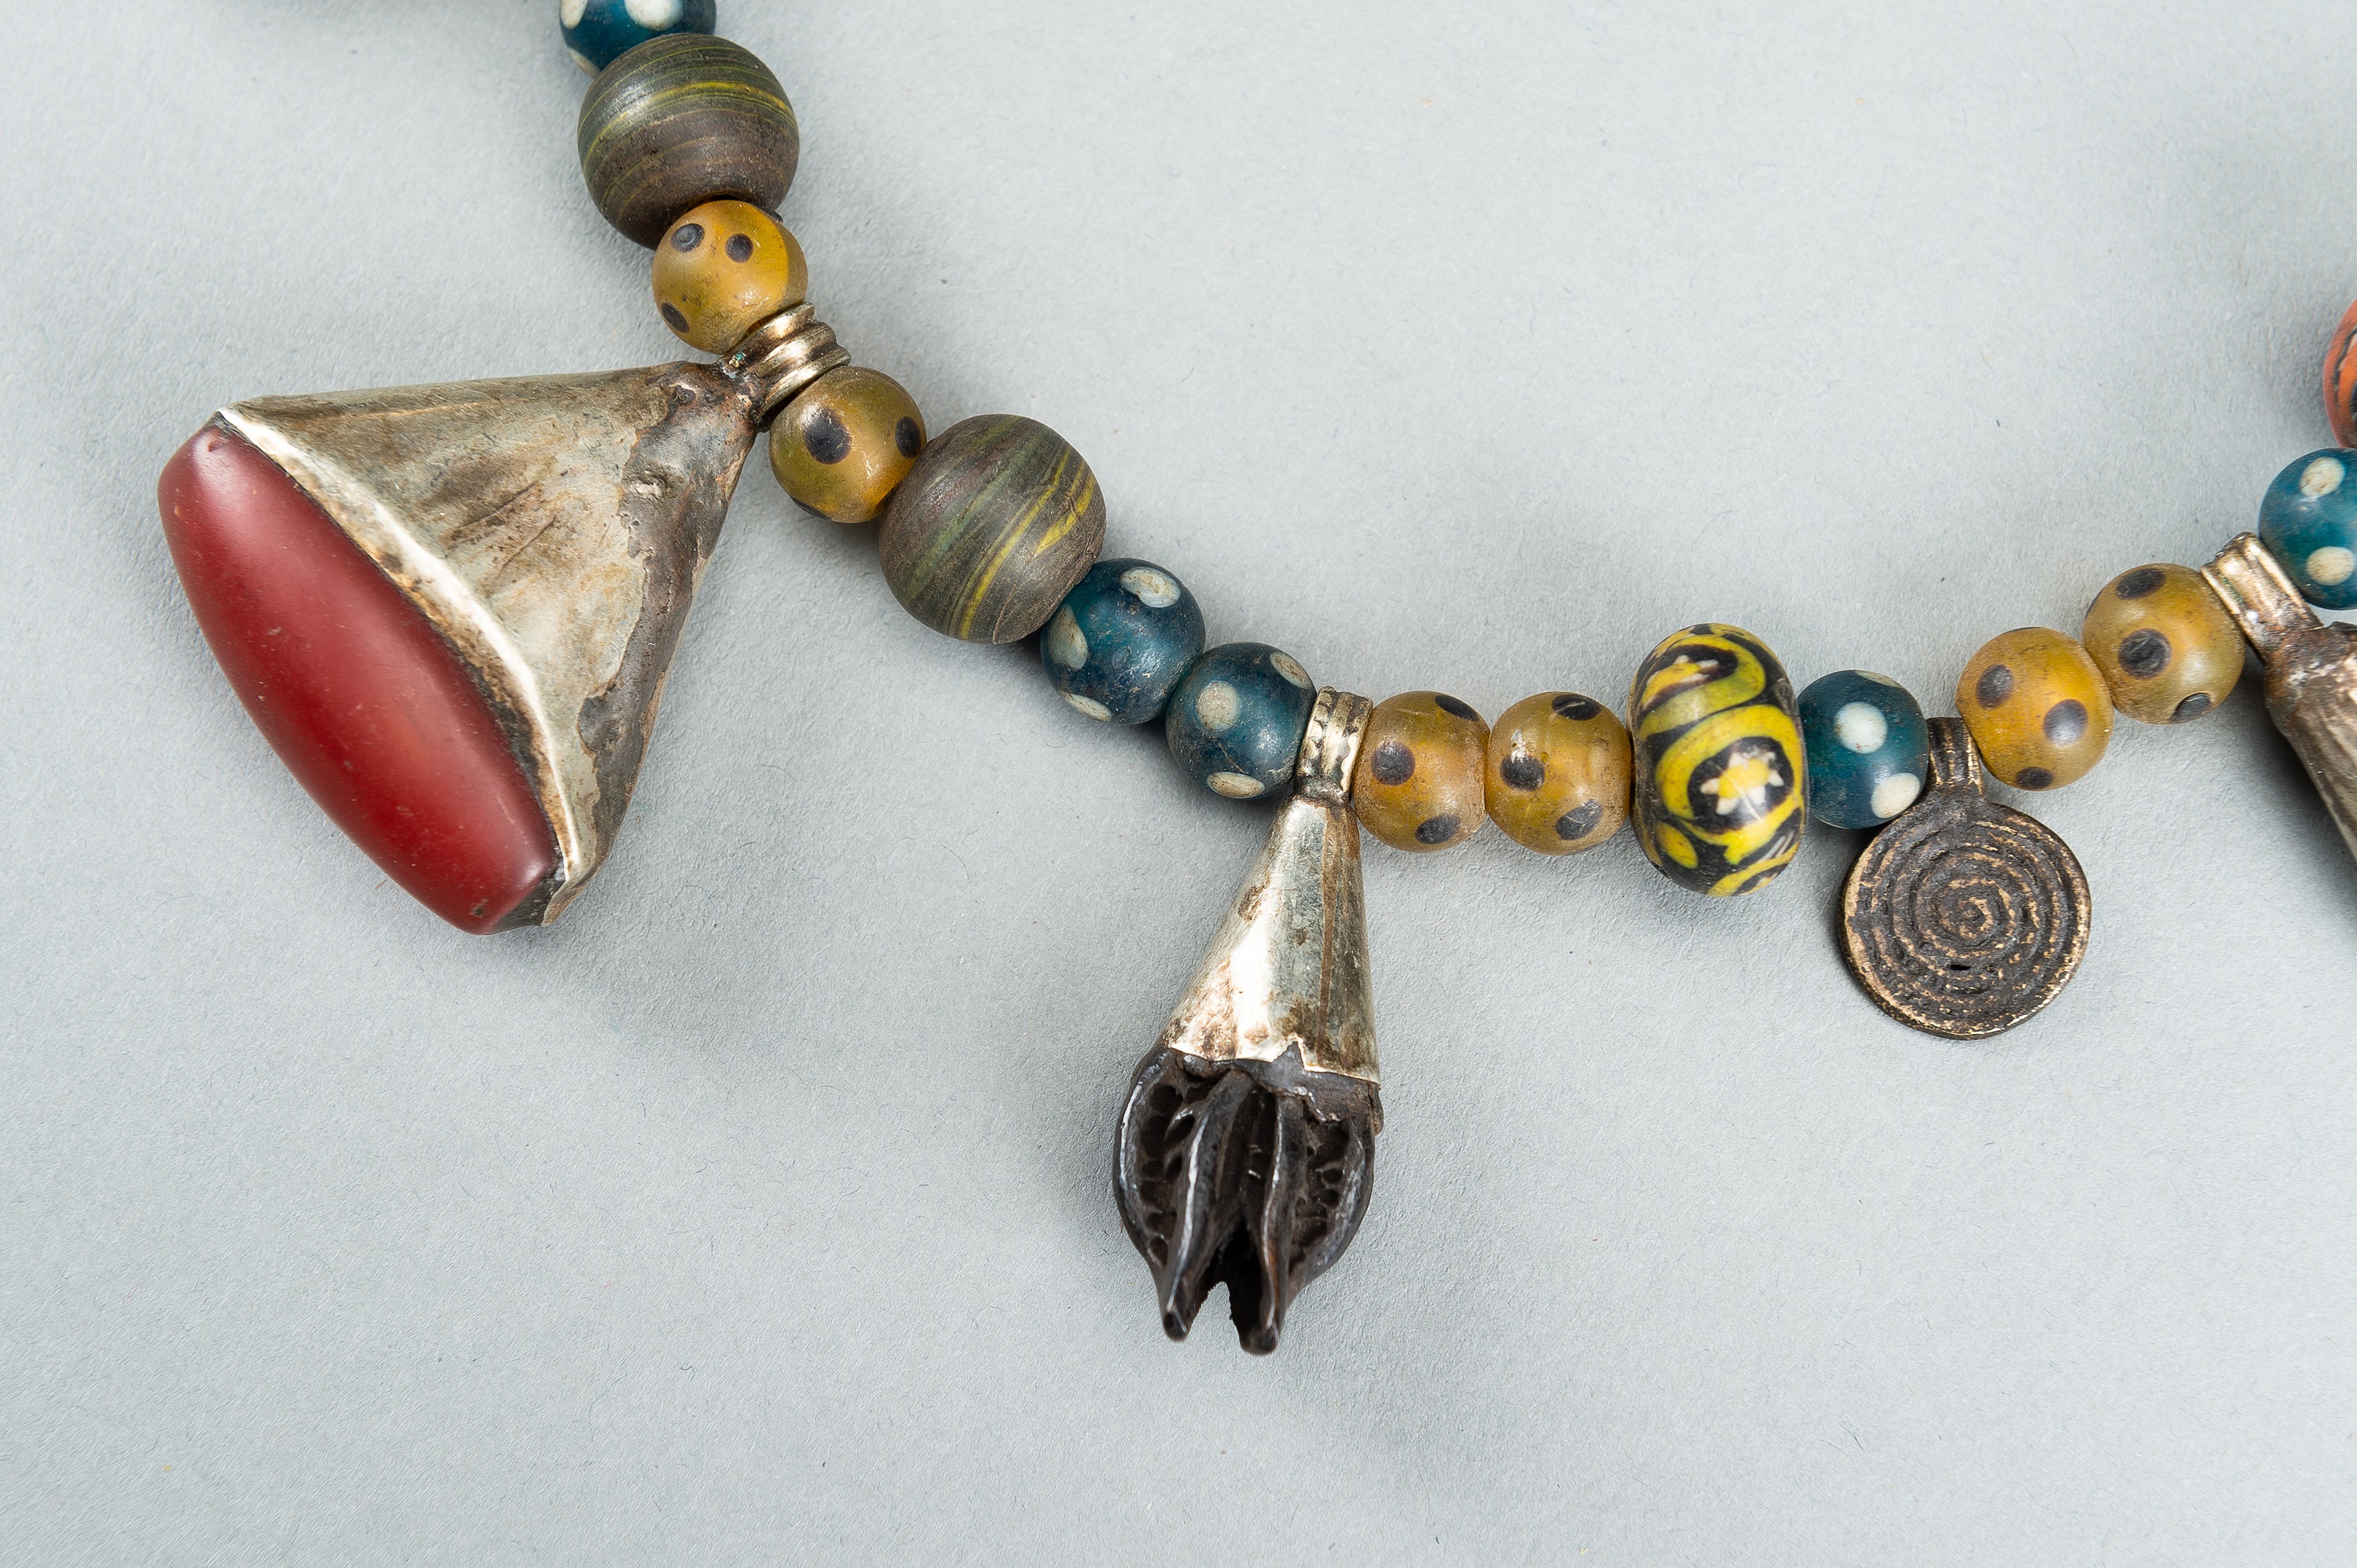 A NAGALAND MULTI-COLORED GLASS, BRASS AND SHELL NECKLACE, c. 1900s - Image 6 of 17